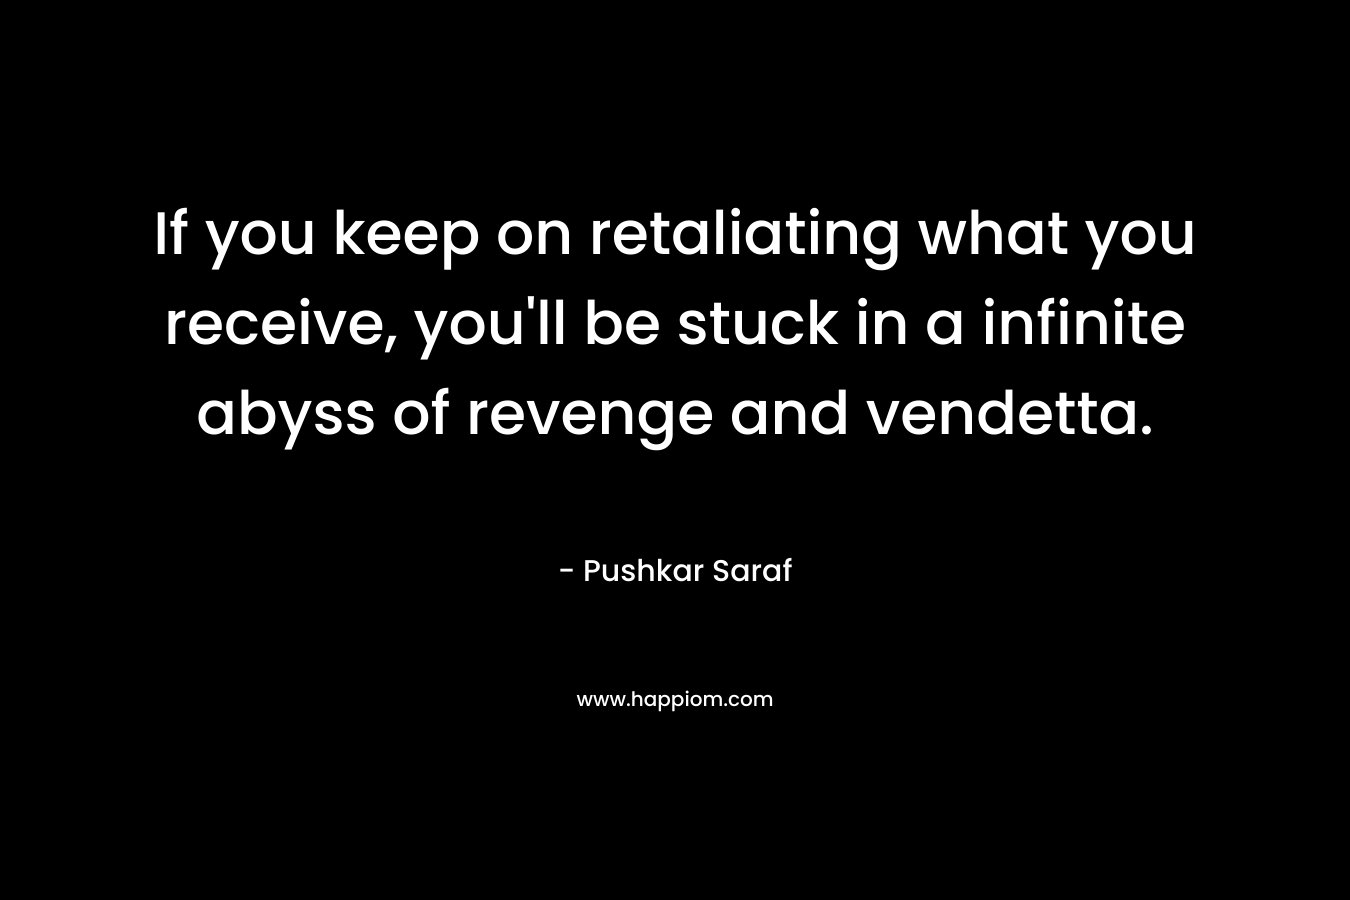 If you keep on retaliating what you receive, you’ll be stuck in a infinite abyss of revenge and vendetta. – Pushkar Saraf